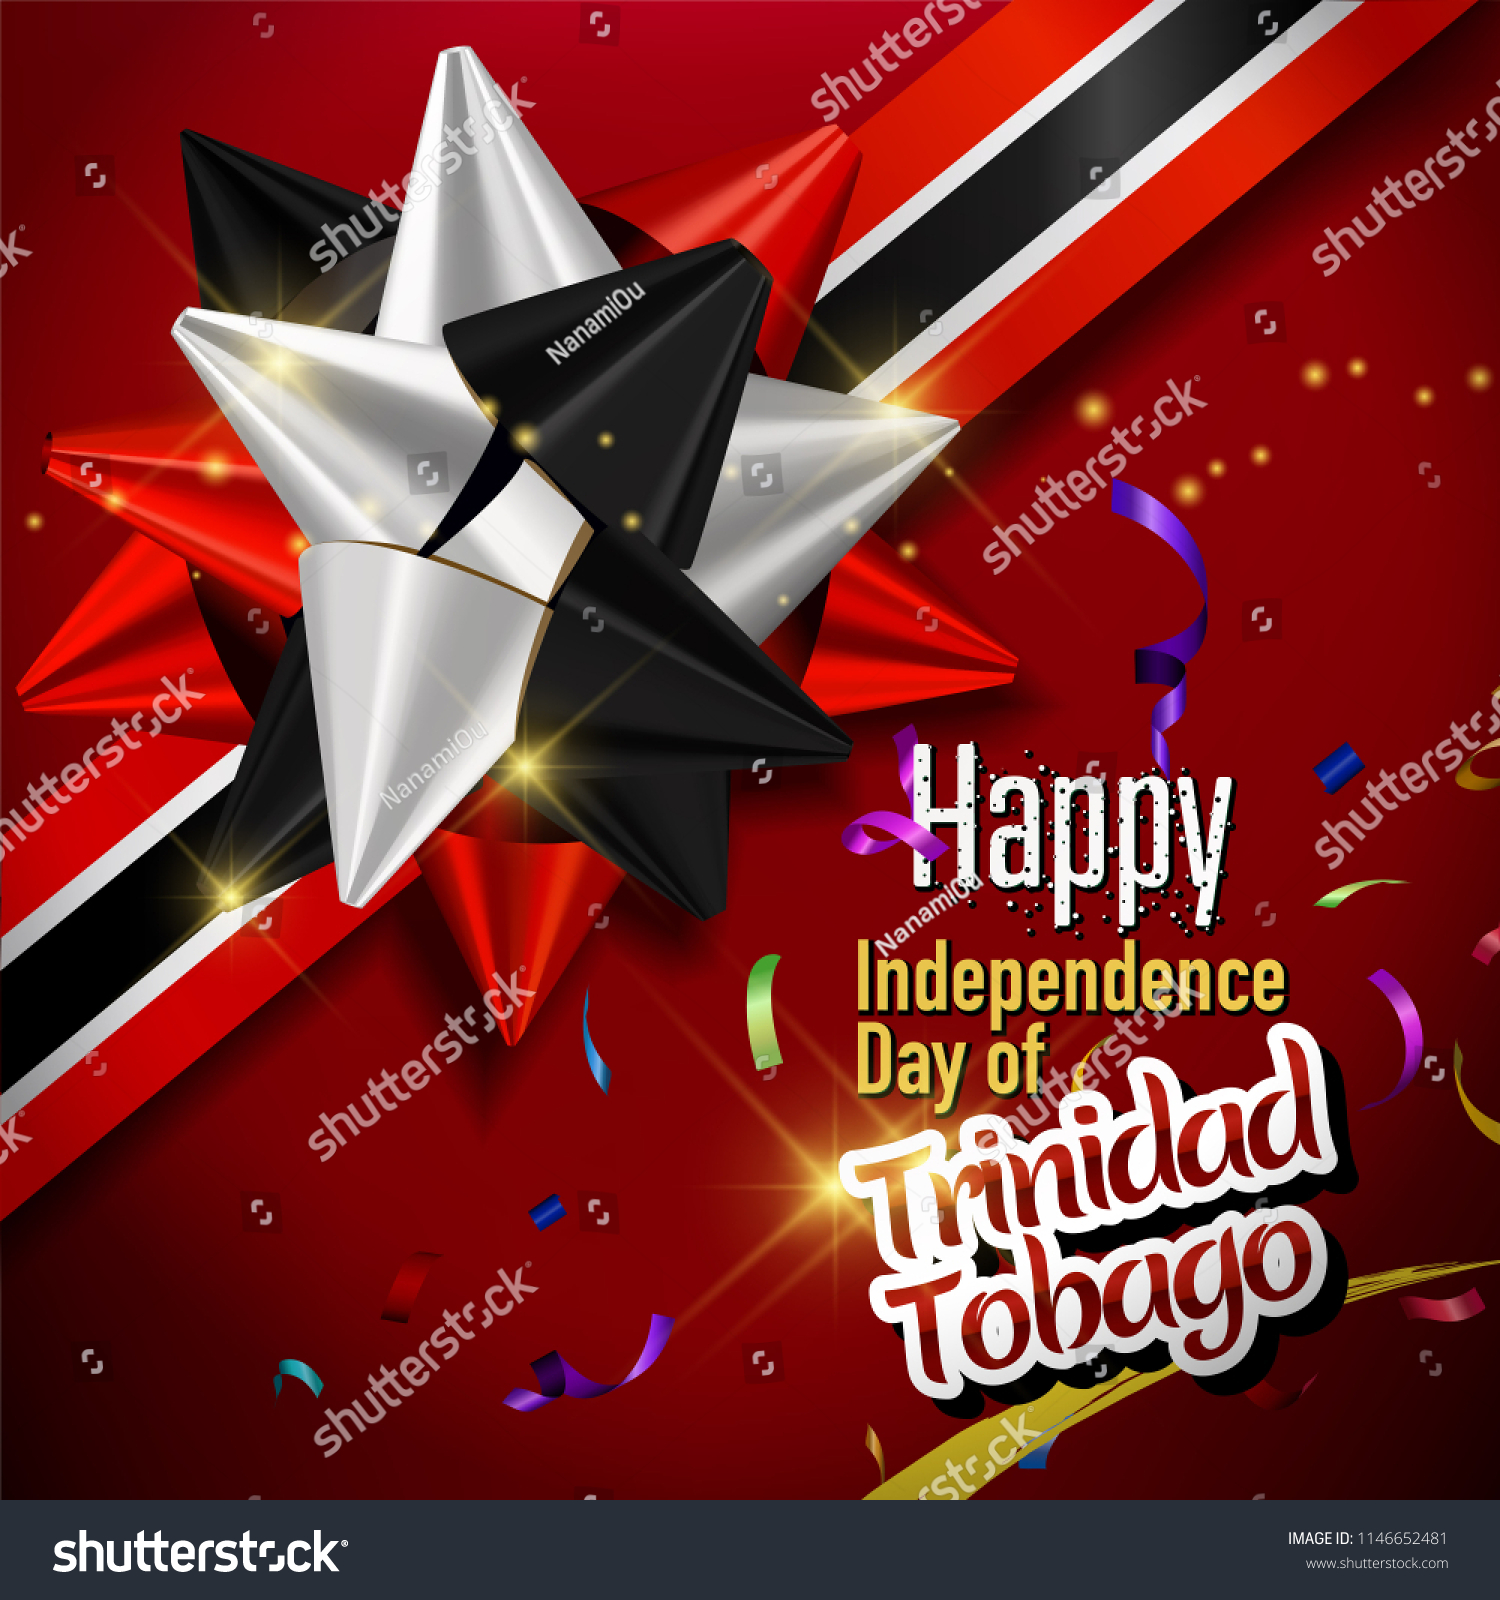 Happy independence day 2021